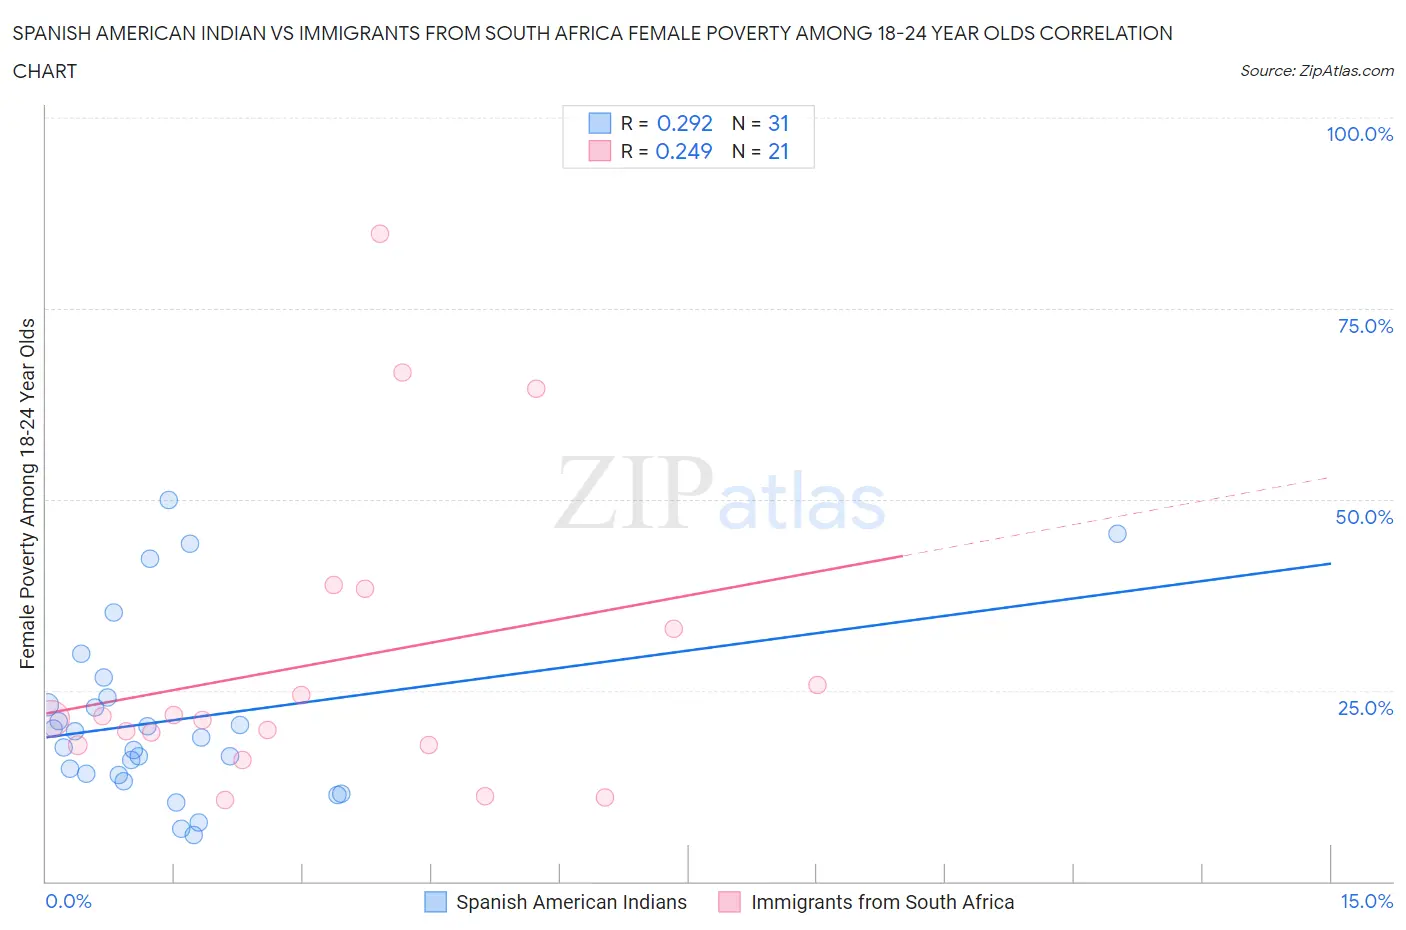 Spanish American Indian vs Immigrants from South Africa Female Poverty Among 18-24 Year Olds